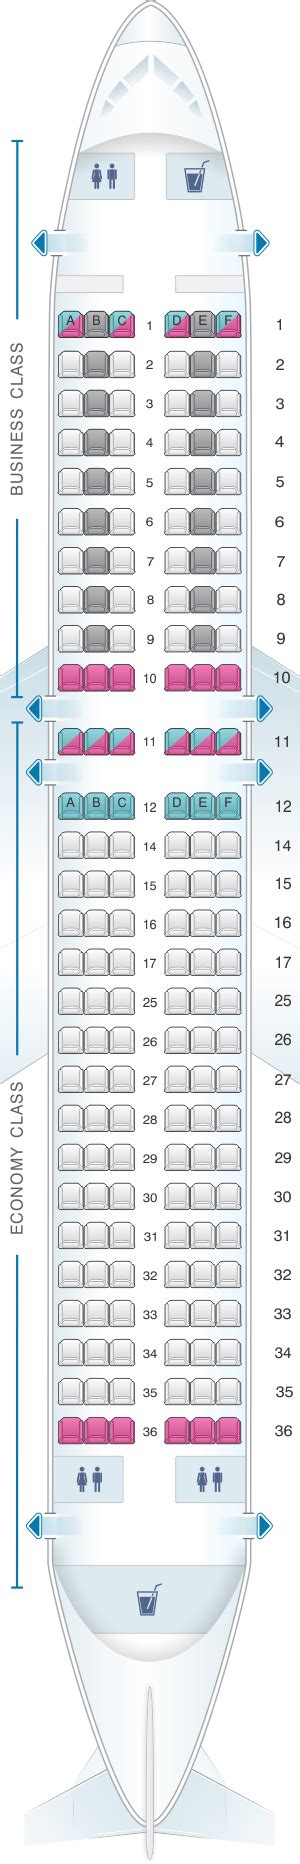 Airbus A320 Seat Configuration